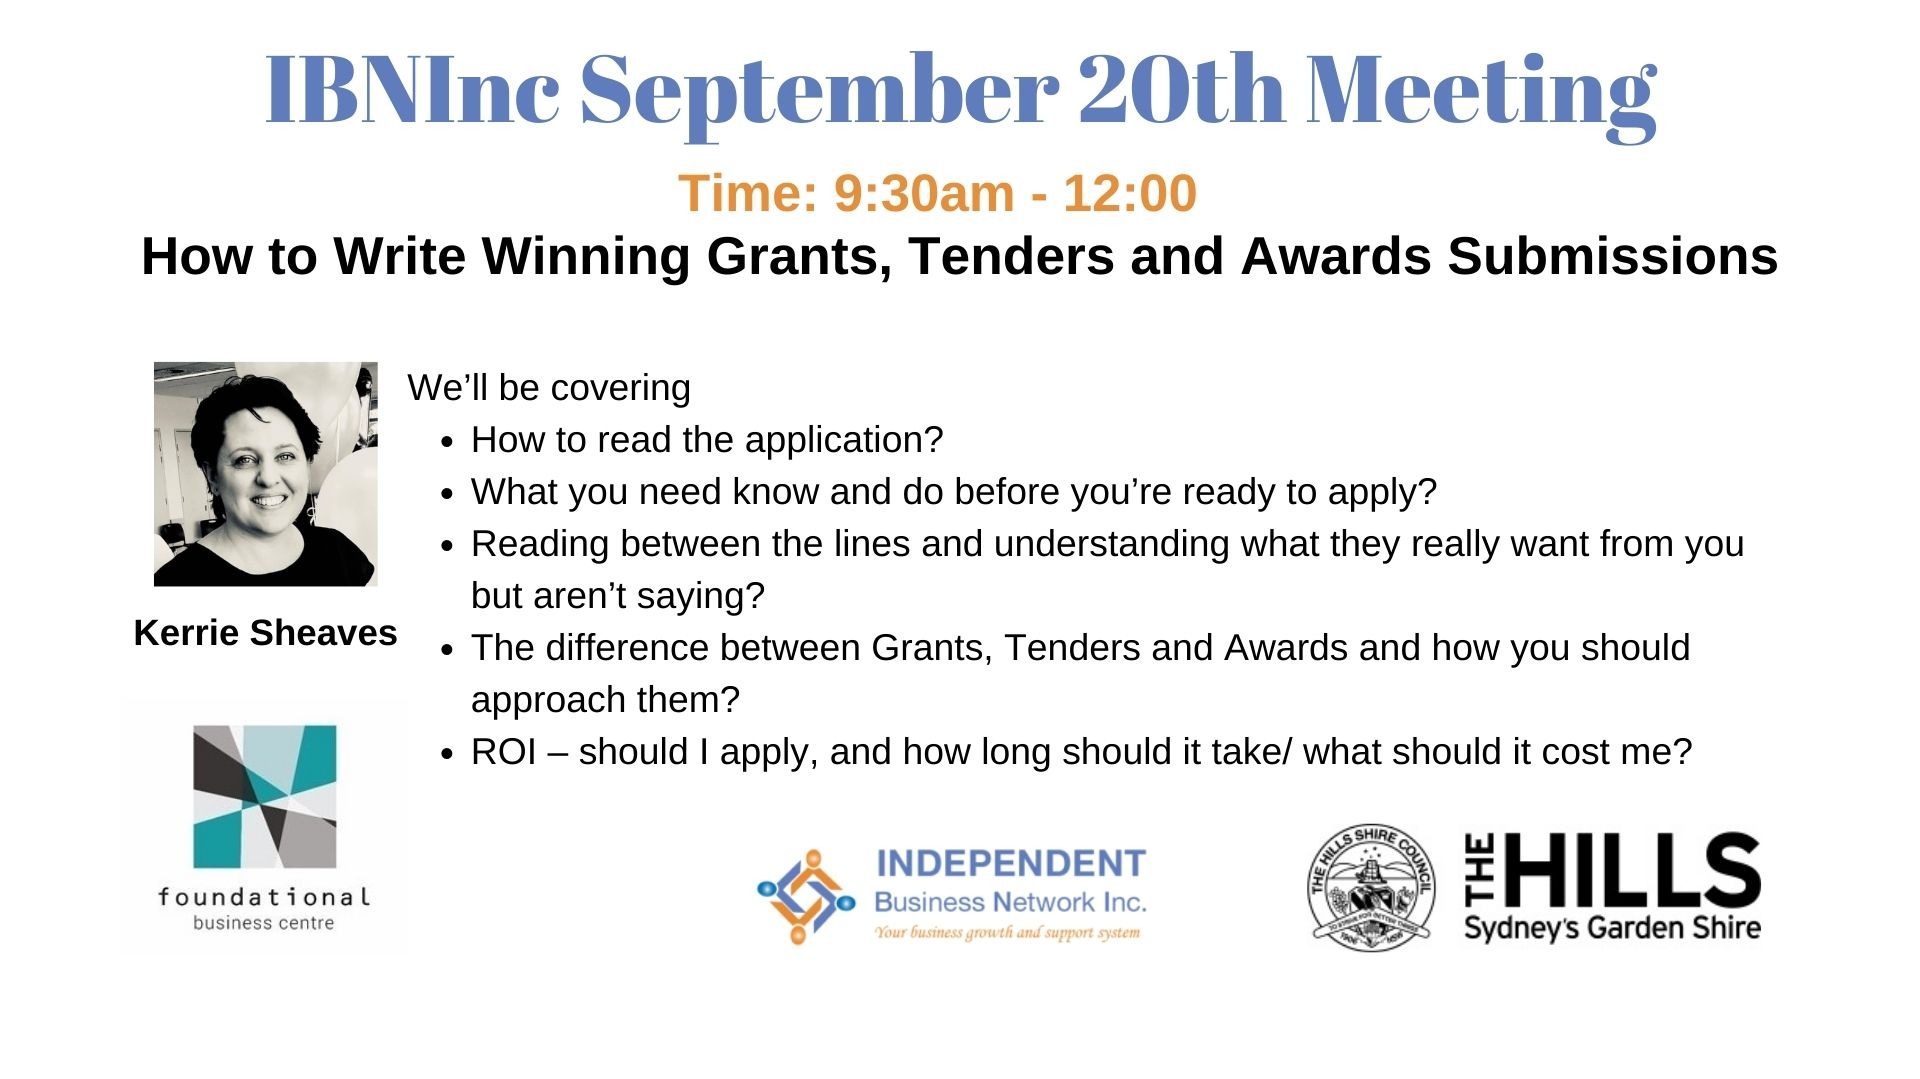 How to Write Winning Grants, Tenders and Awards Submissions